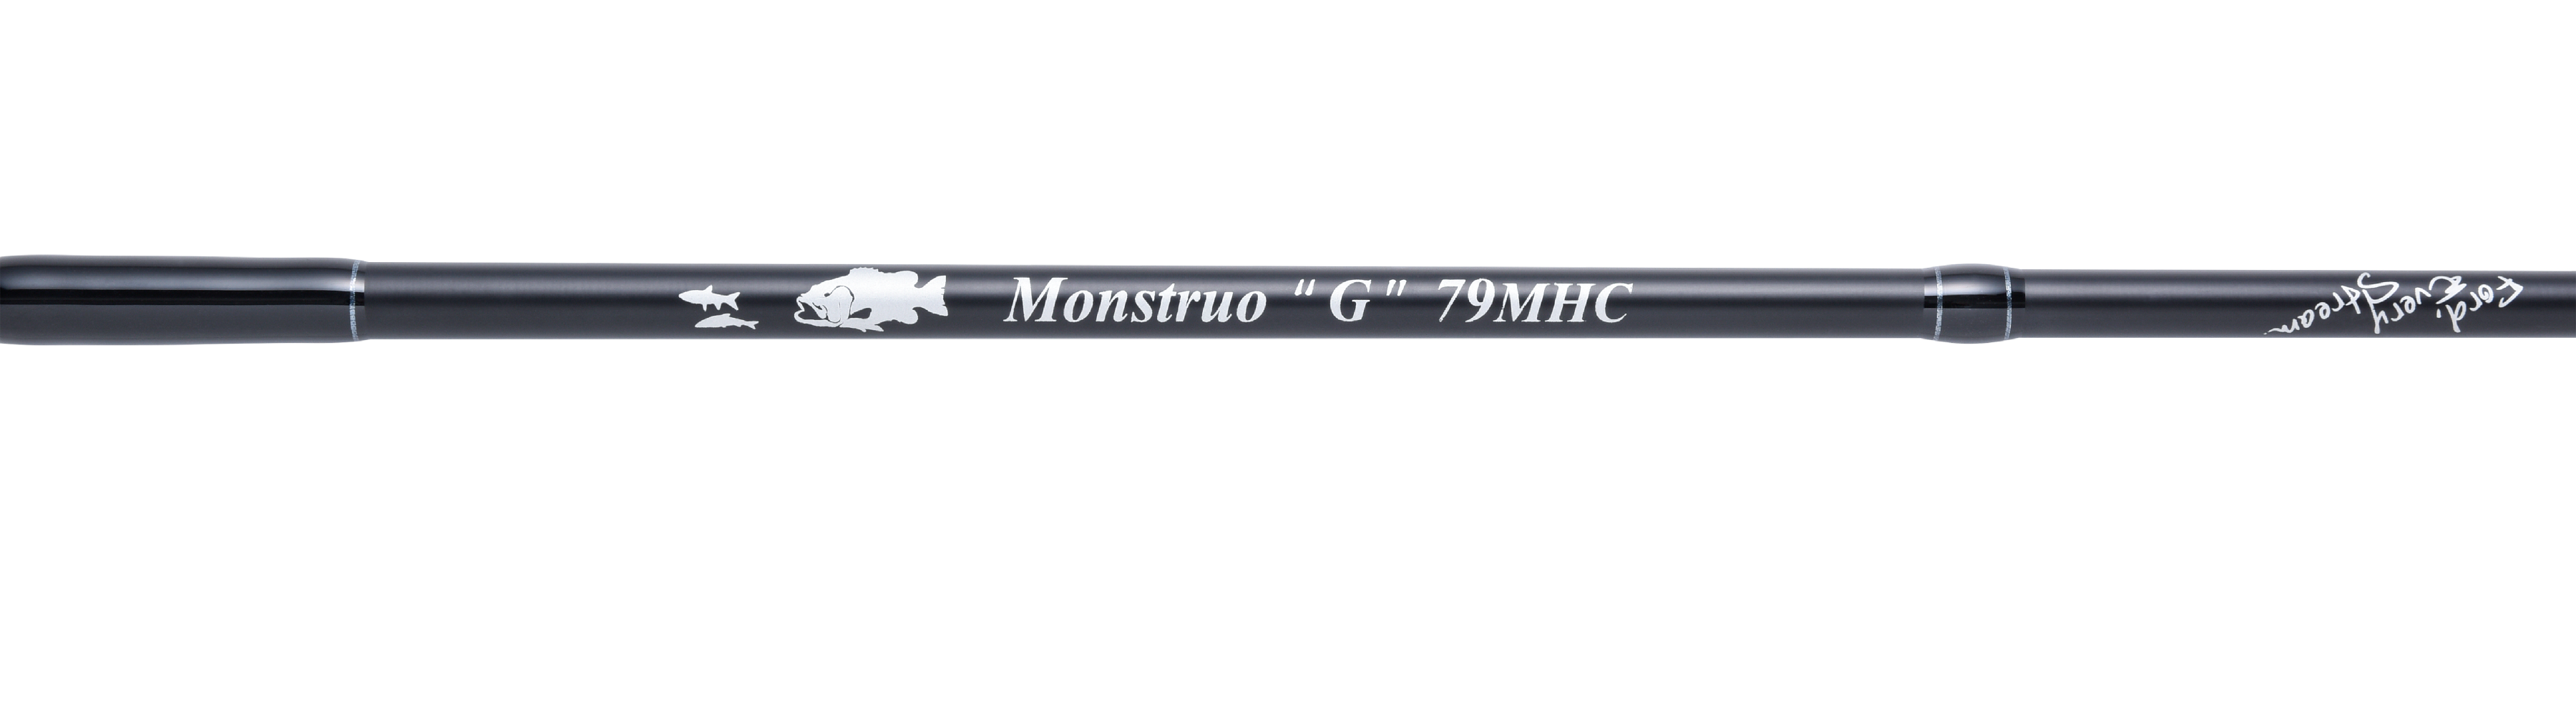 TULALA | Ford every stream | » Monstruo”G” 79MHC